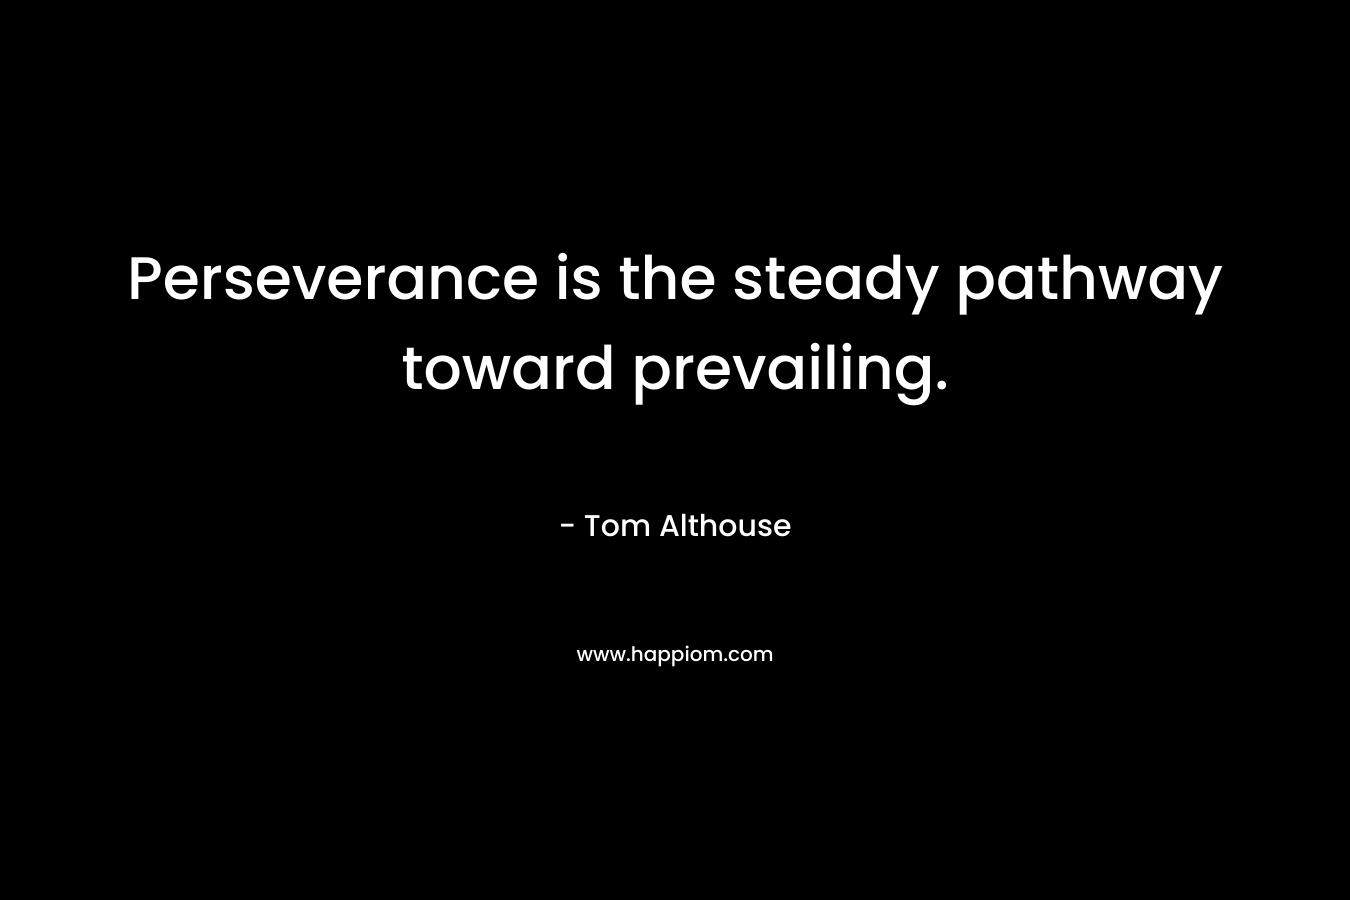 Perseverance is the steady pathway toward prevailing.